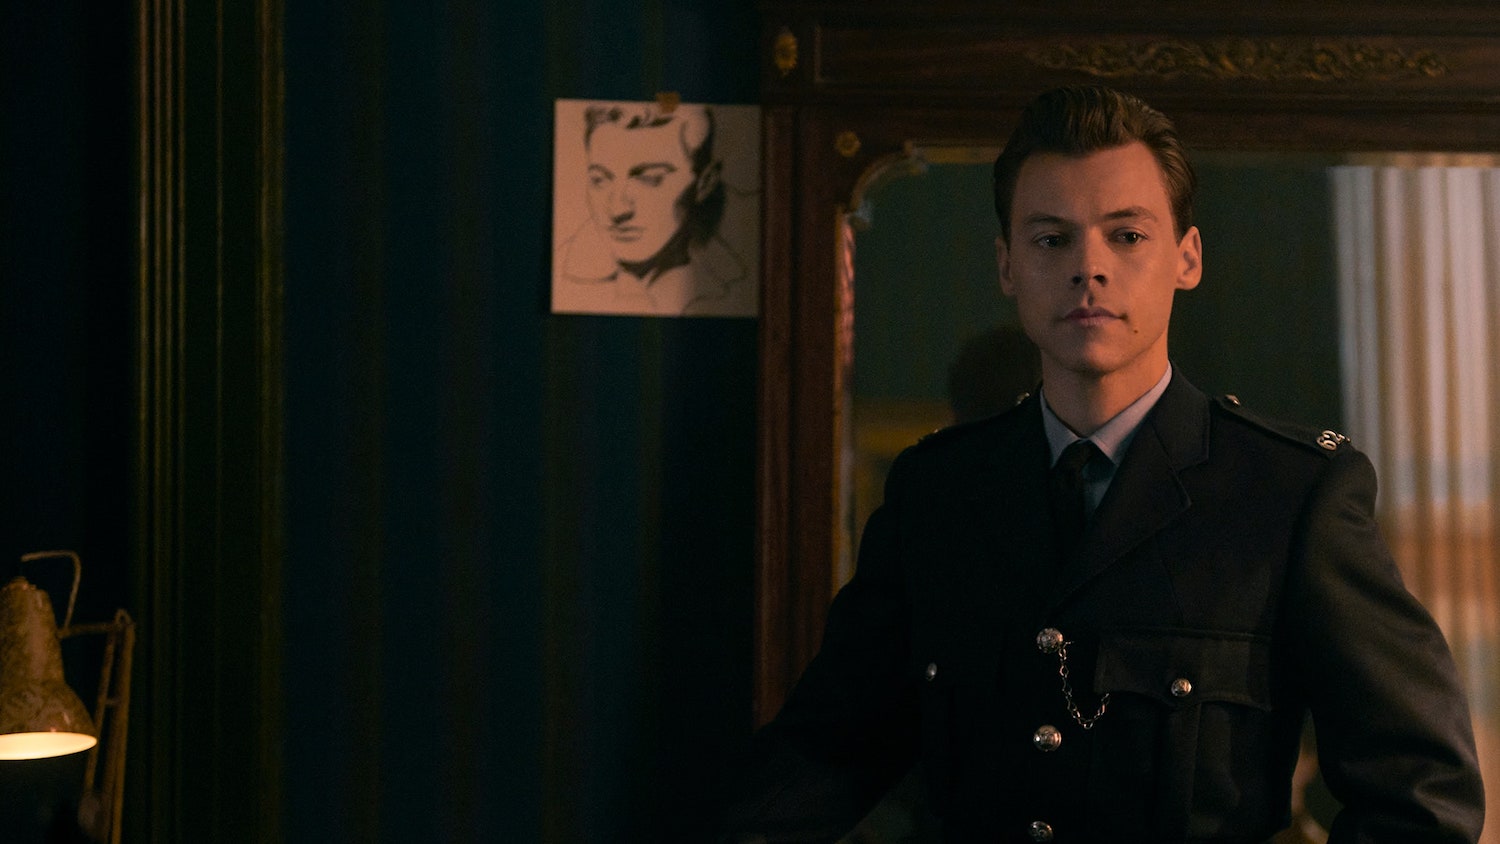 Picture shows: Tom (Harry Styles) in uniform in Patrick's apartment. The room is dark and there is a classical-looking monochrome piece of art on the wall behind him.